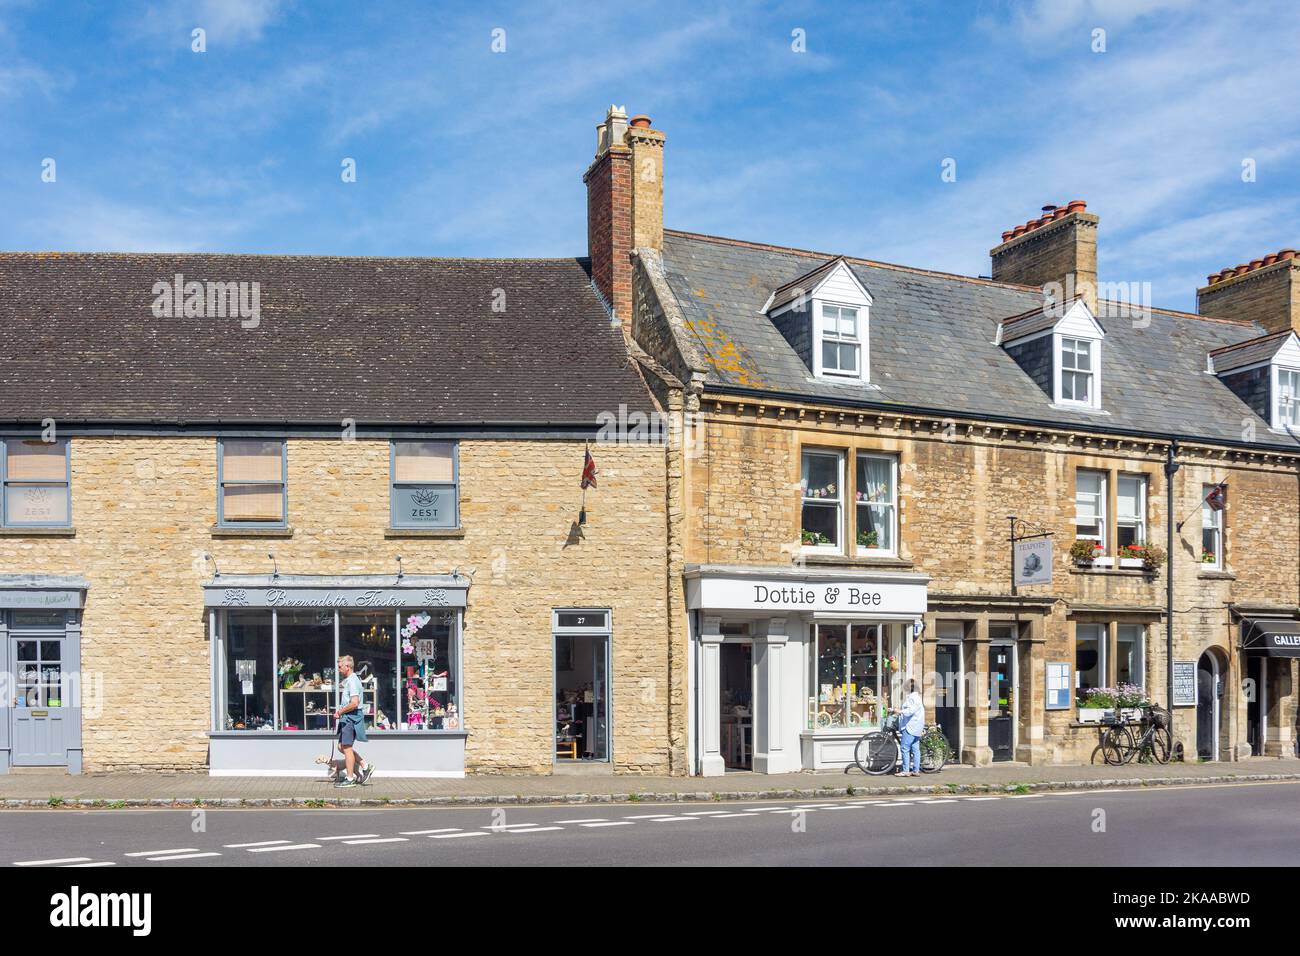 Boutiques sur High Street, Olney, Buckinghamshire, Angleterre, Royaume-Uni Banque D'Images